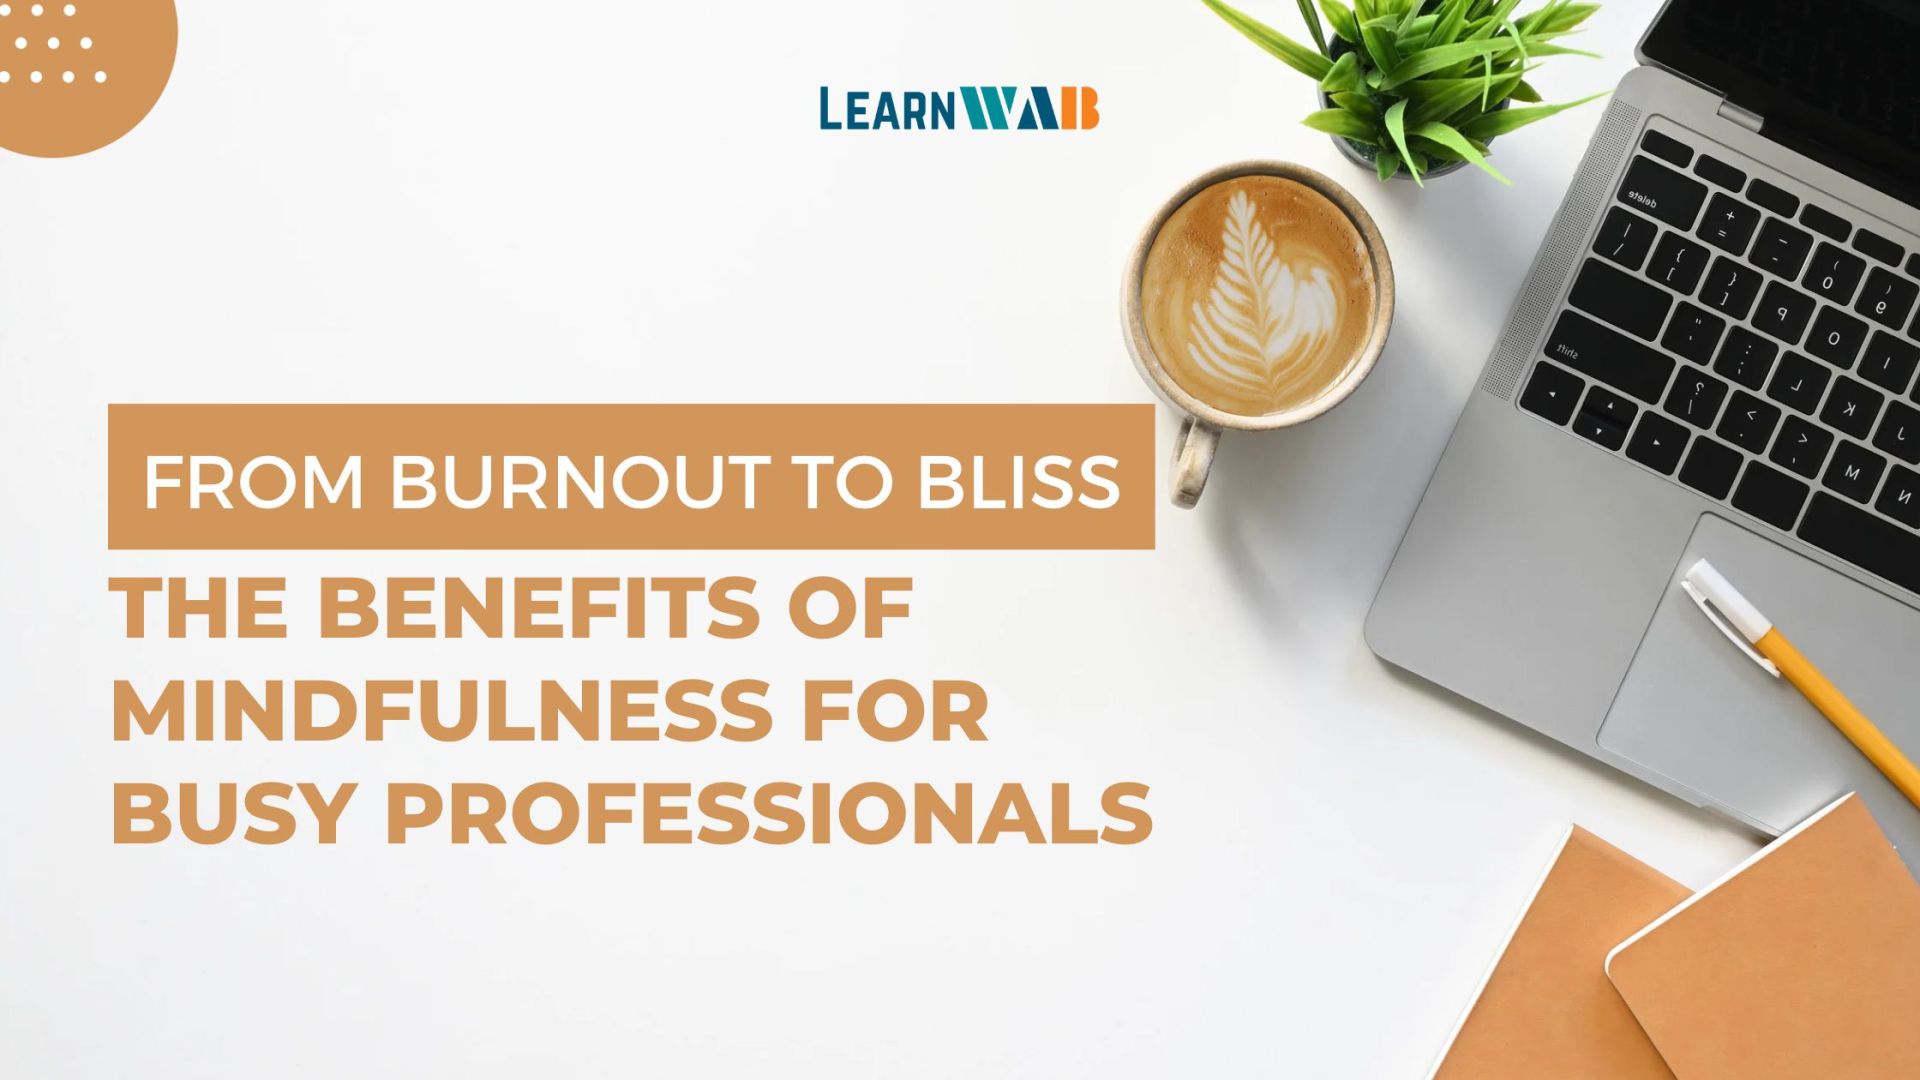 From Burnout to Bliss: The Benefits of Mindfulness for Busy Professionals